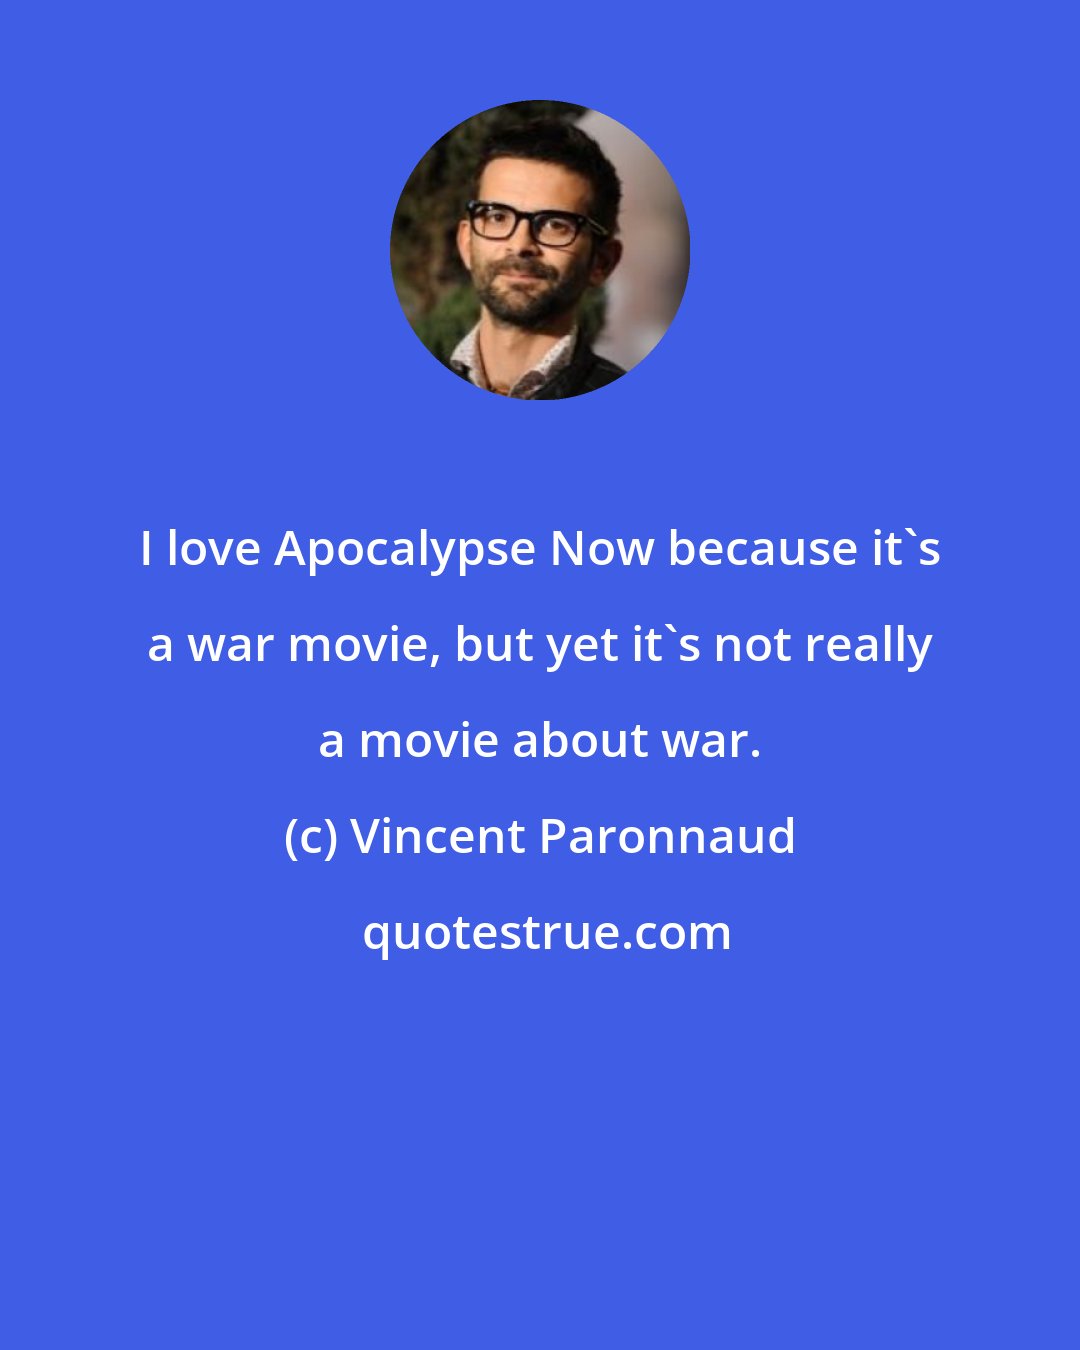 Vincent Paronnaud: I love Apocalypse Now because it's a war movie, but yet it's not really a movie about war.